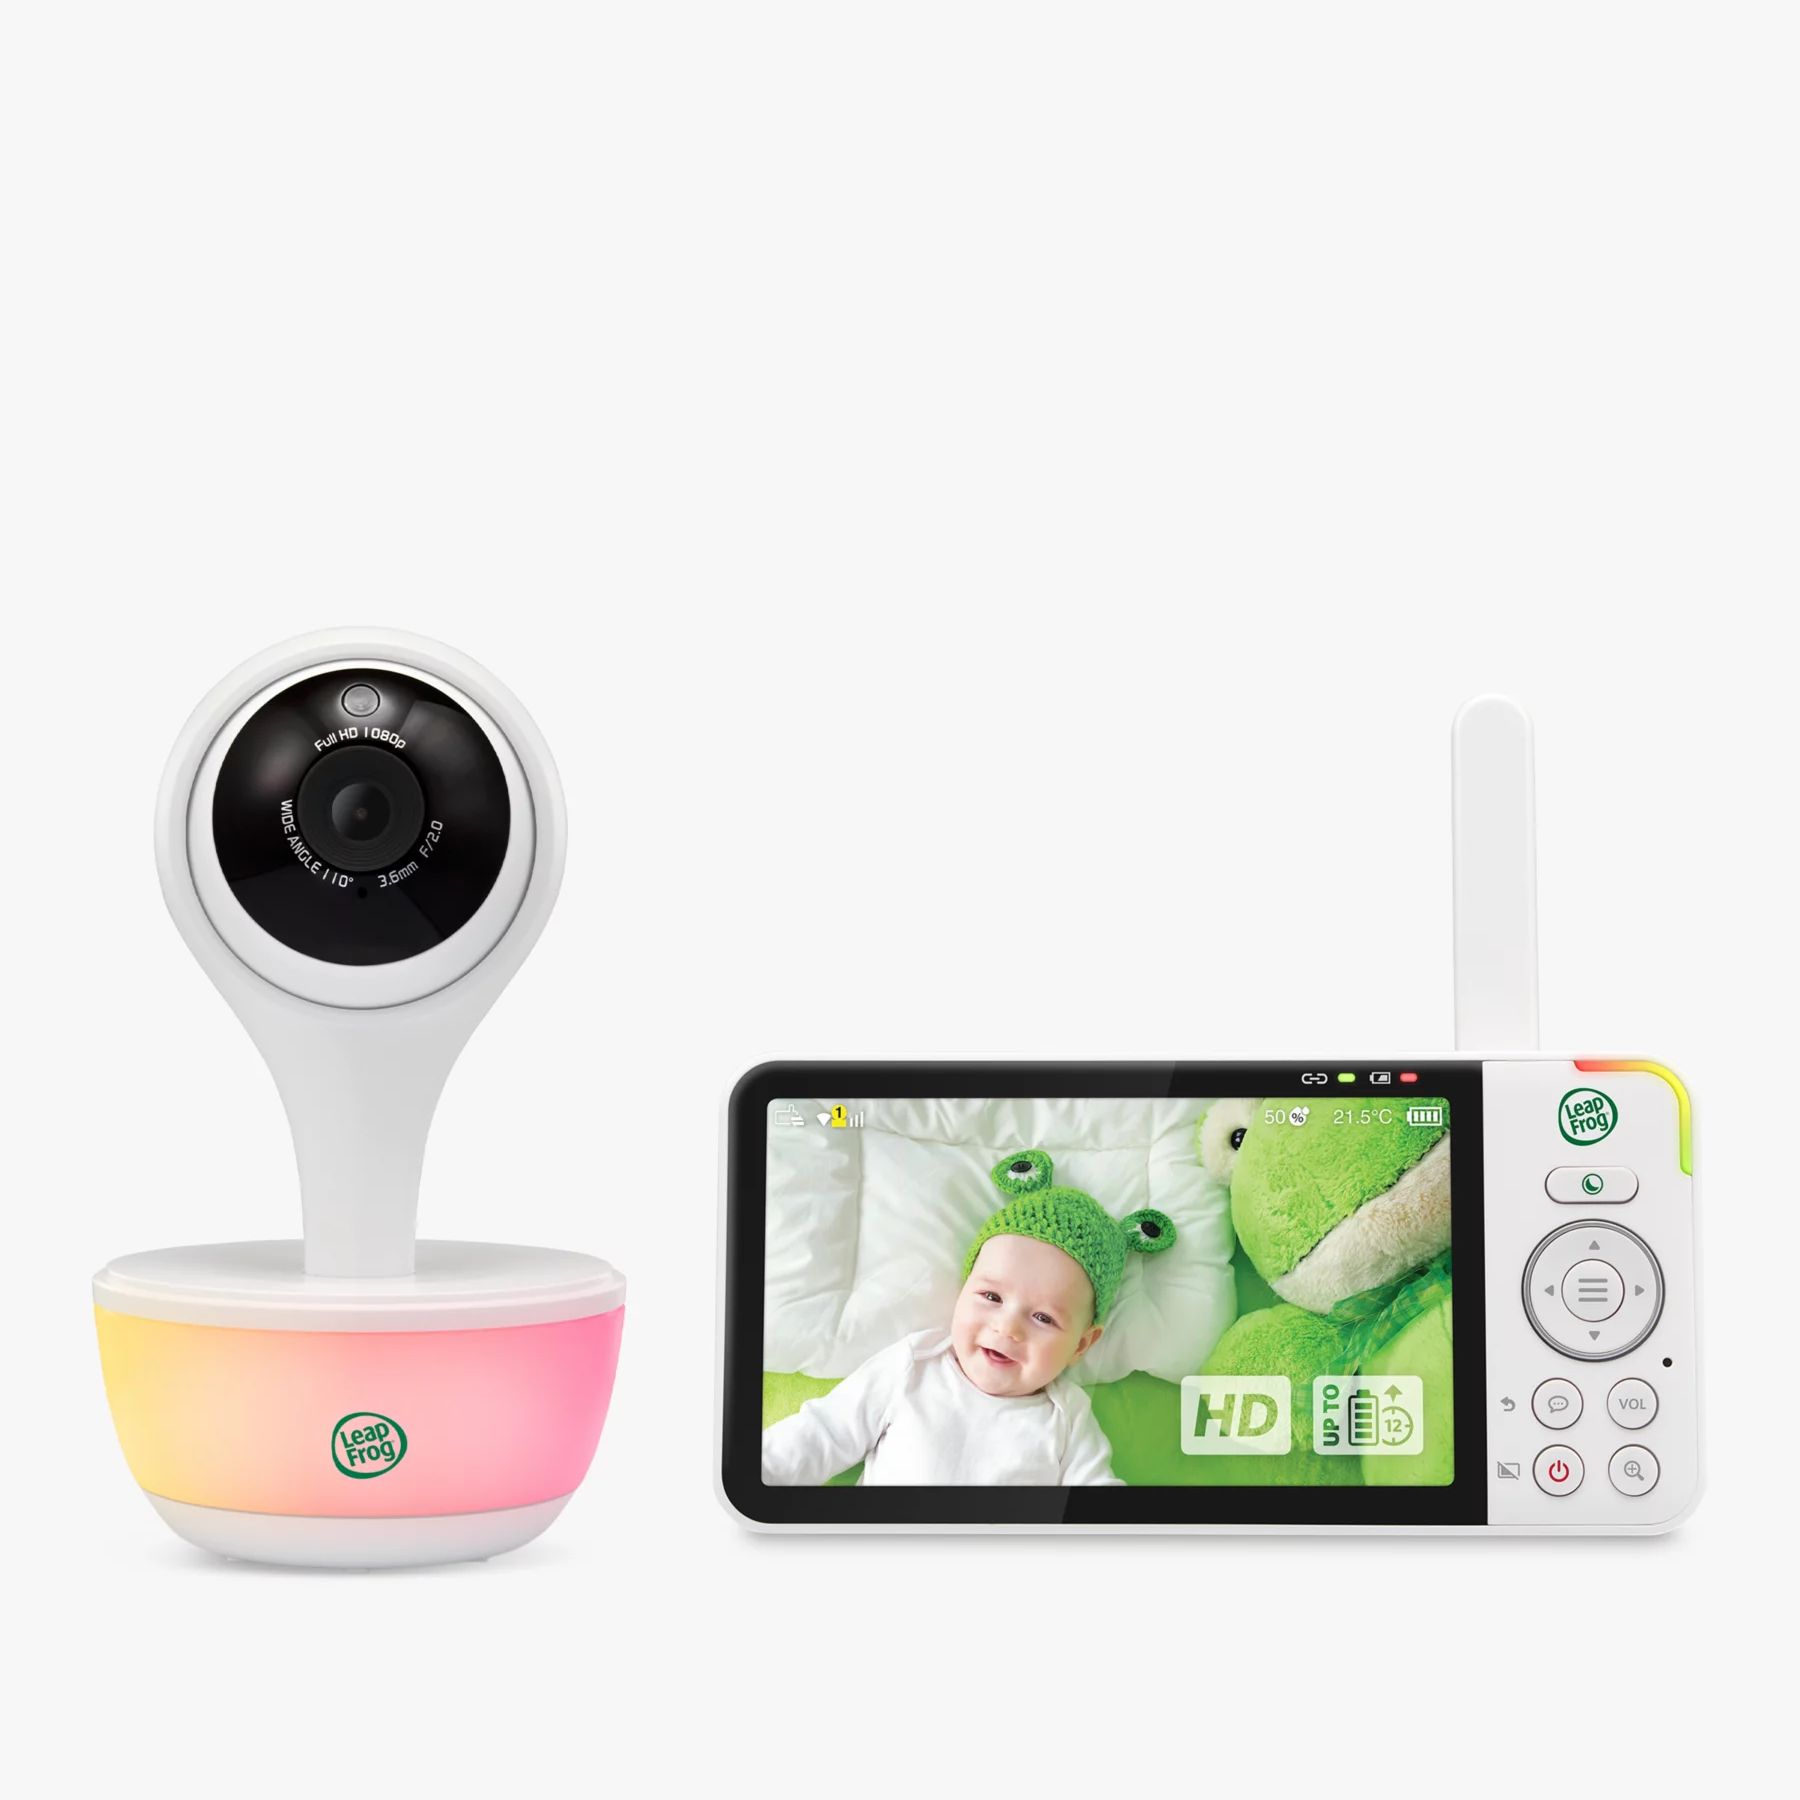 Image of LeapFrog LF815HD WI FI Smart 5inch HD Video Baby Monitor product on a grey background